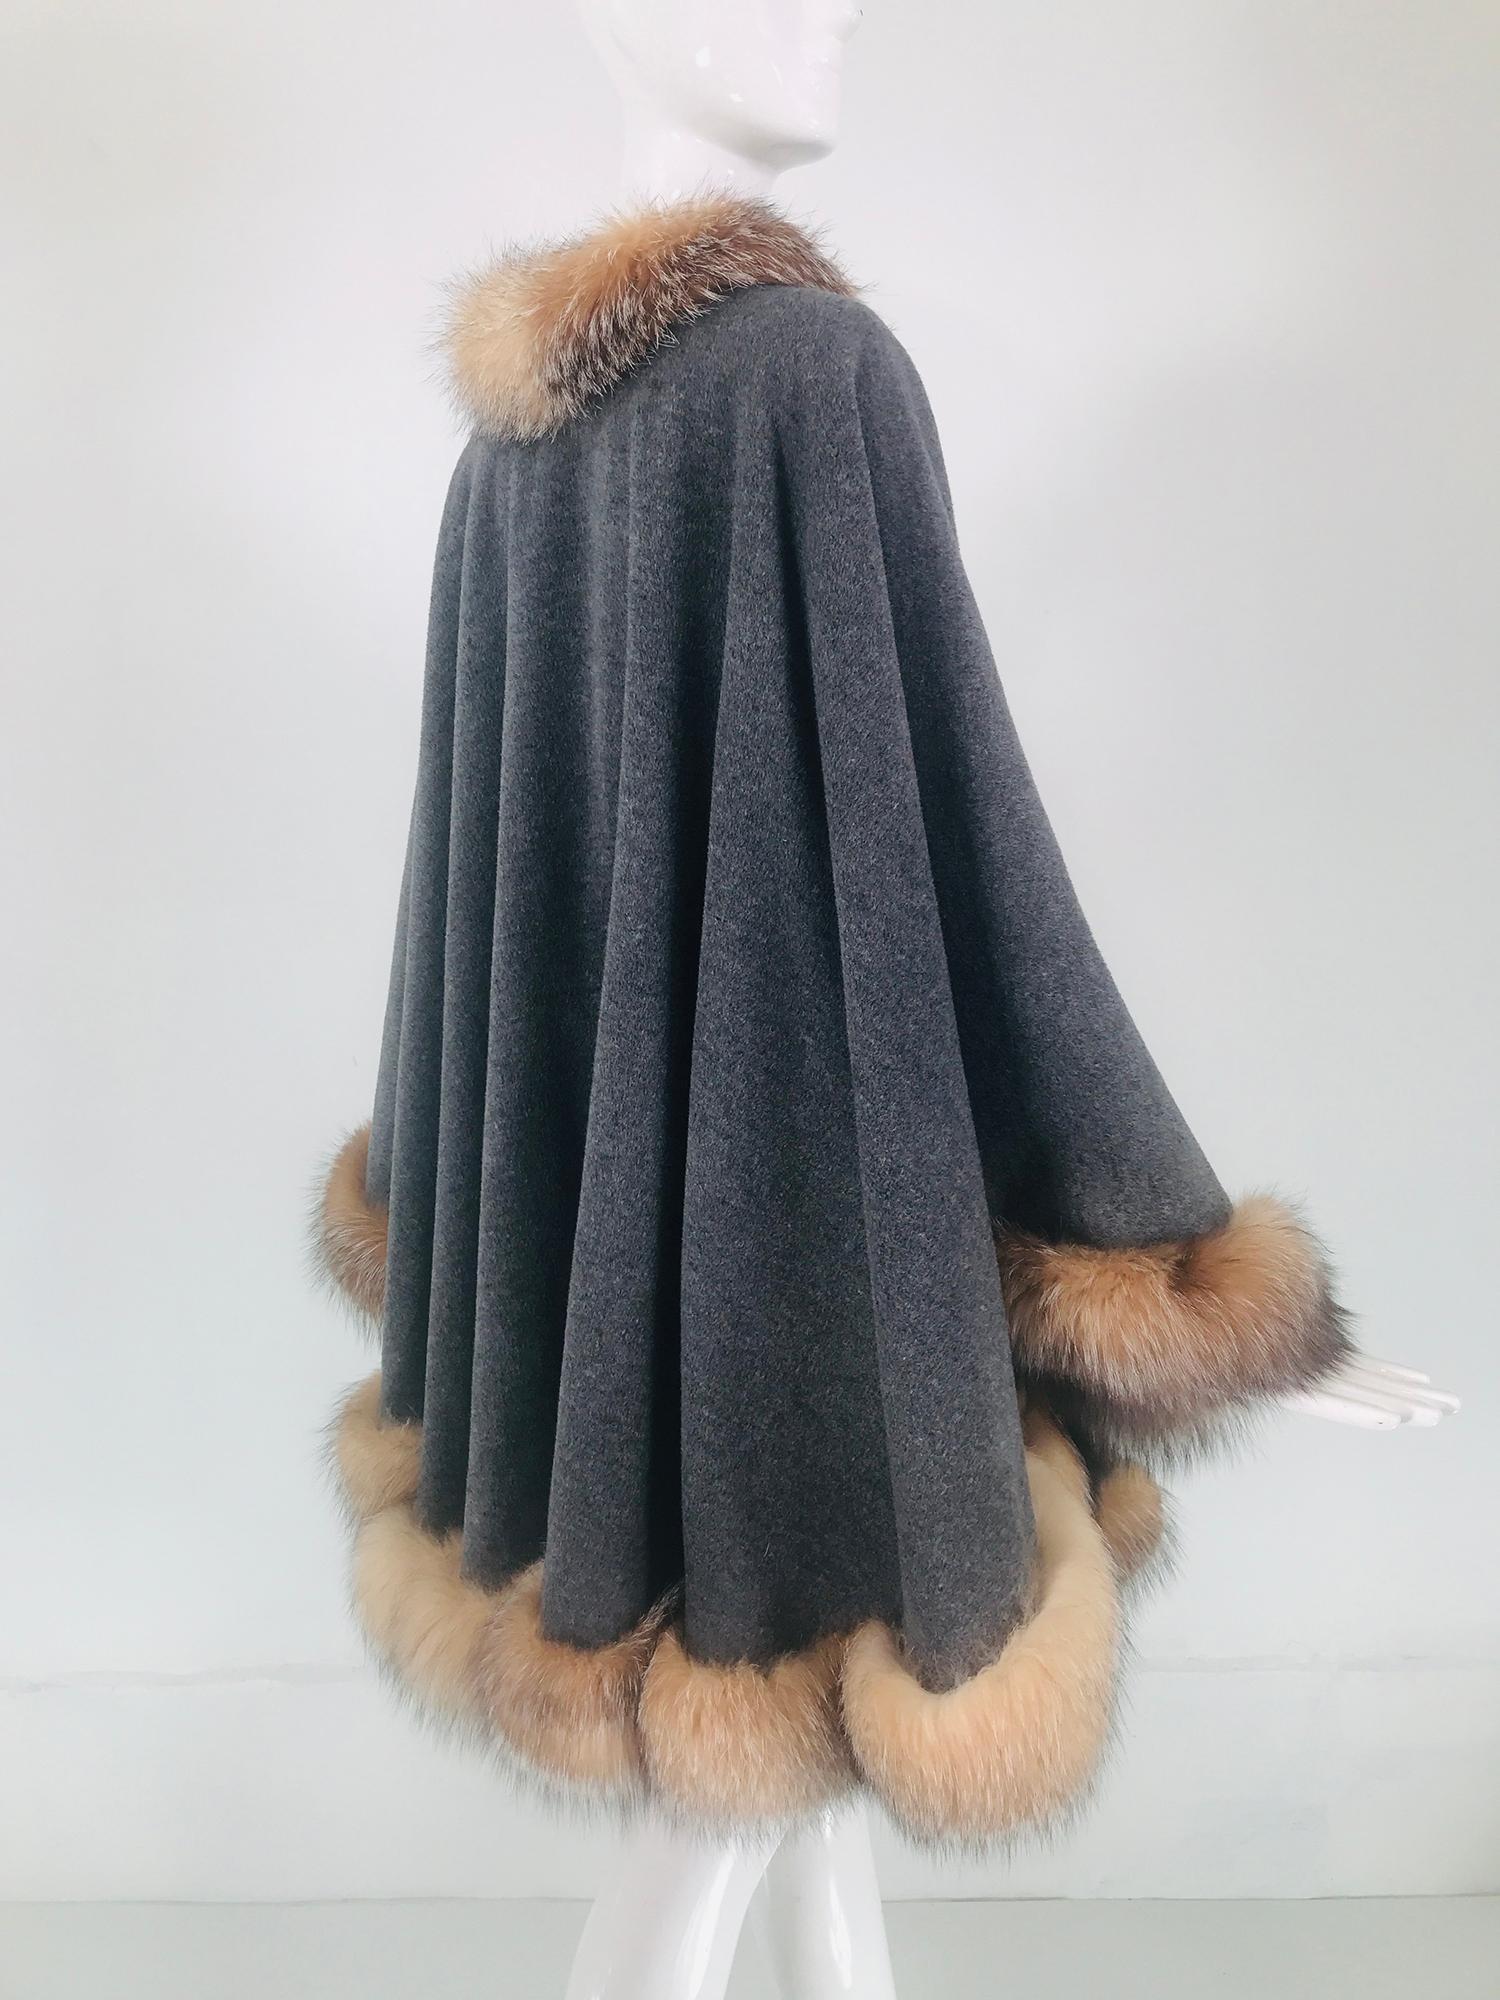 Sprung Freres Paris Red Fox Wool/Cashmere Reversible Cape Grey/Camel Tan OS 8